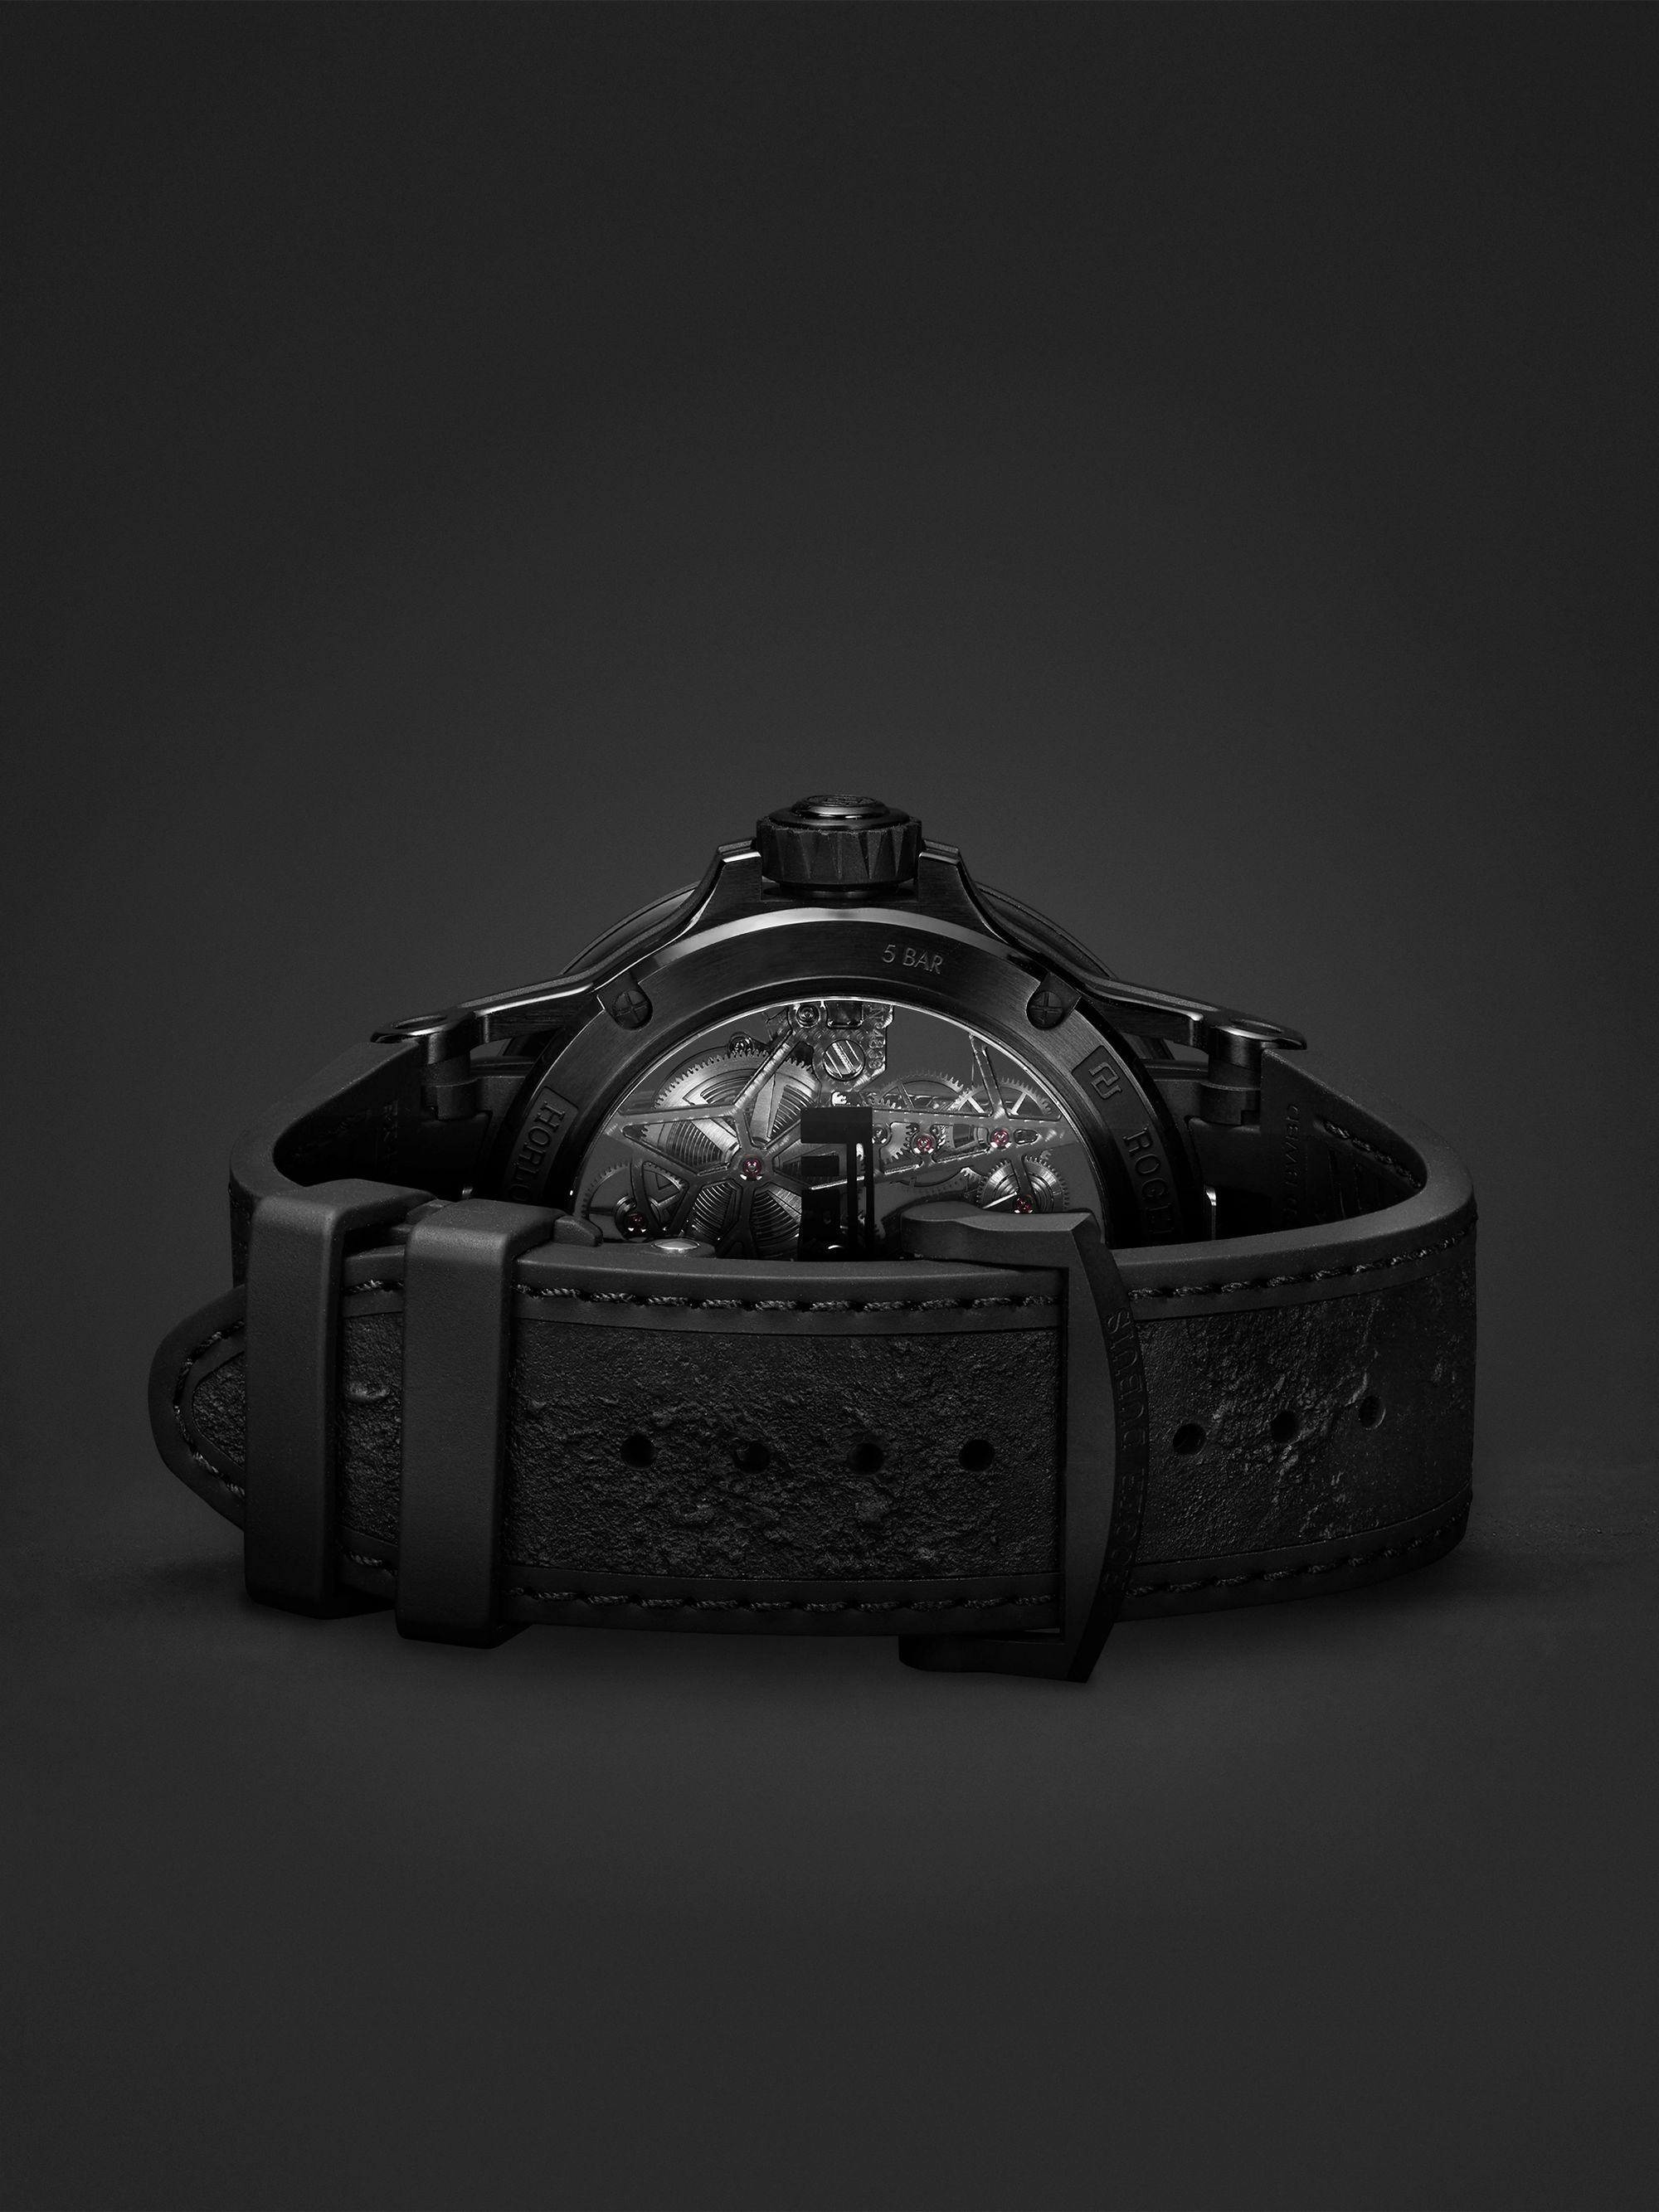 ROGER DUBUIS Excalibur Spider Pirelli Automatic Skeleton 45mm Black DLC-Coated Titanium and Rubber Watch, Ref. No. RDDBEX0826